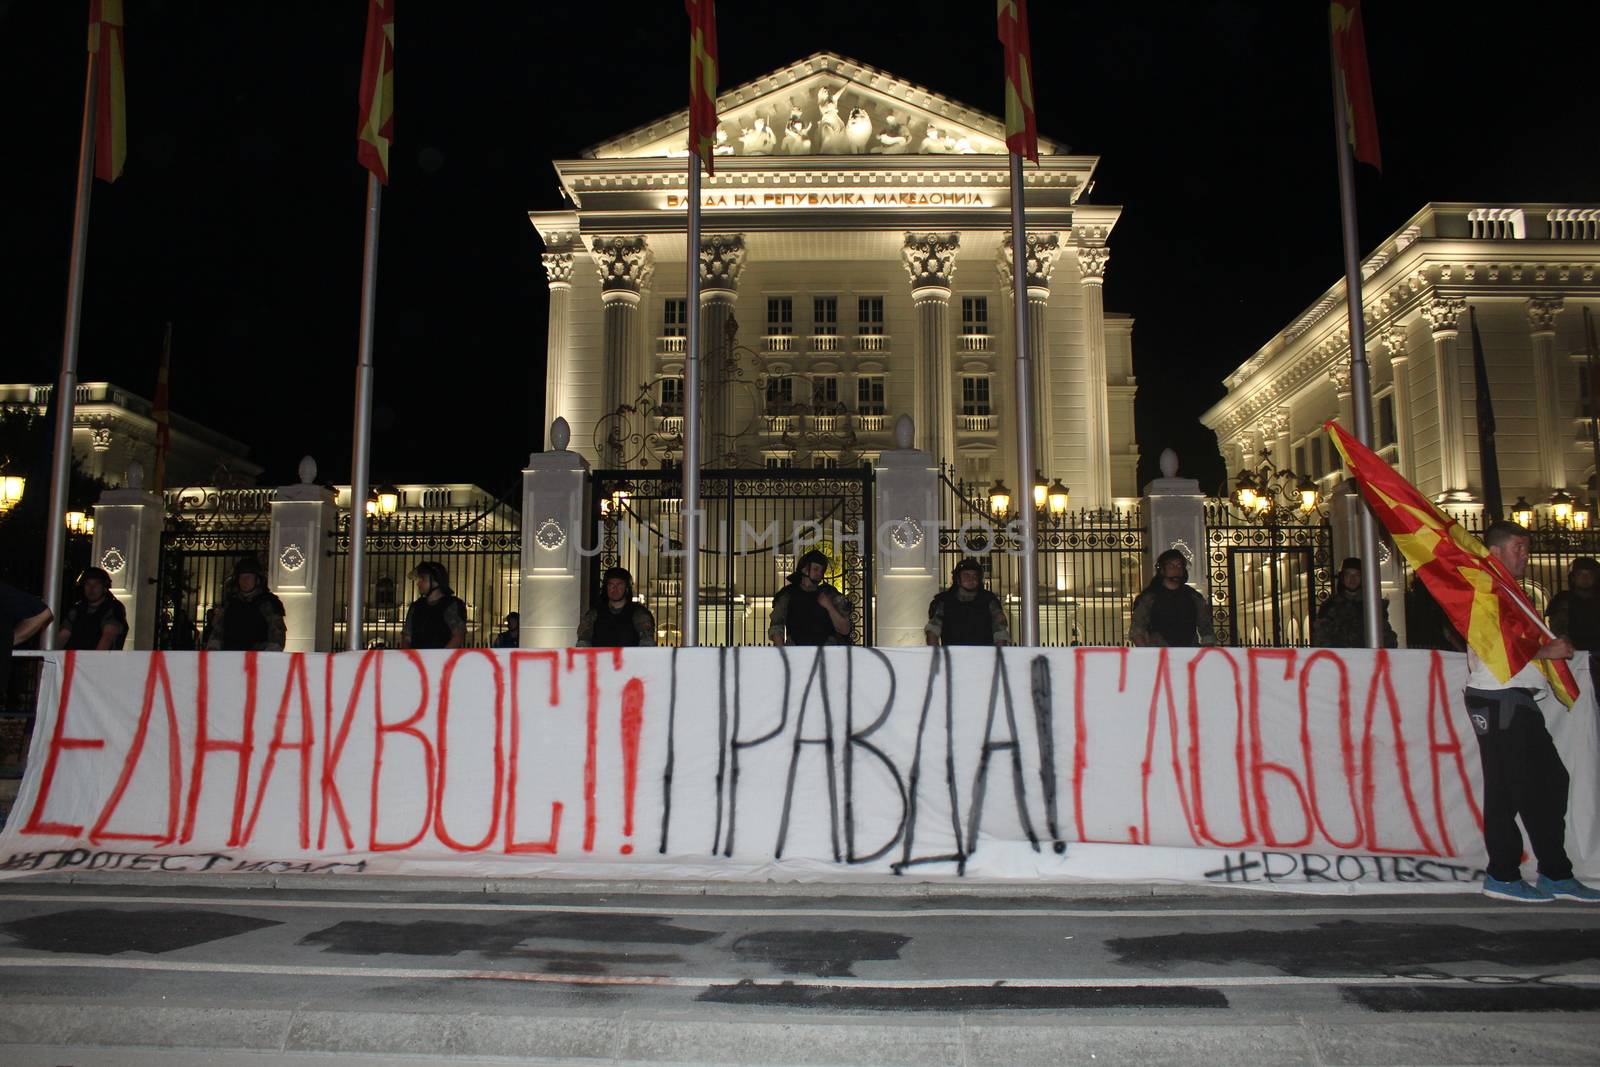 MACEDONIA, Skopje: A protest banner is plastered across the entrance of a government building as thousands carry on demonstrations in Skopje, Macedonia on April 19, 2016. The protests began nearly one week ago, as demonstrators denounced President Gjorge Ivanov's decision to halt probes into more than 50 public figures involved in a wiretapping scandal. Meanwhile, snap elections have been called for June 5.